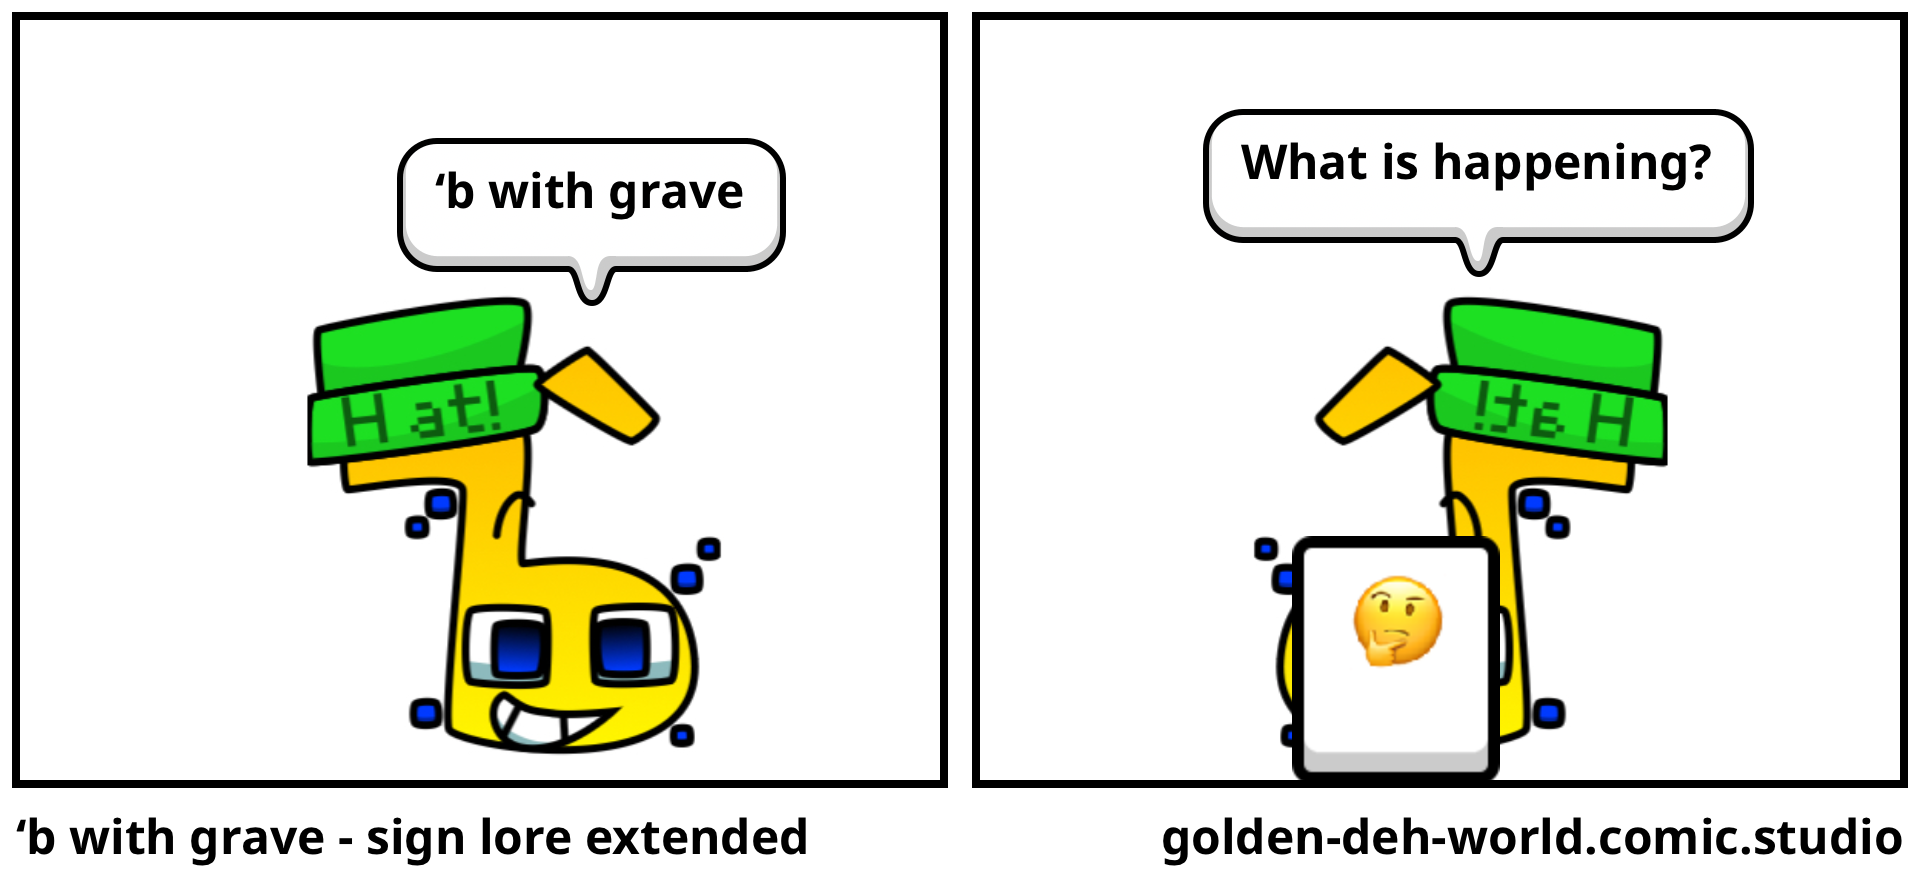 ‘b with grave - sign lore extended